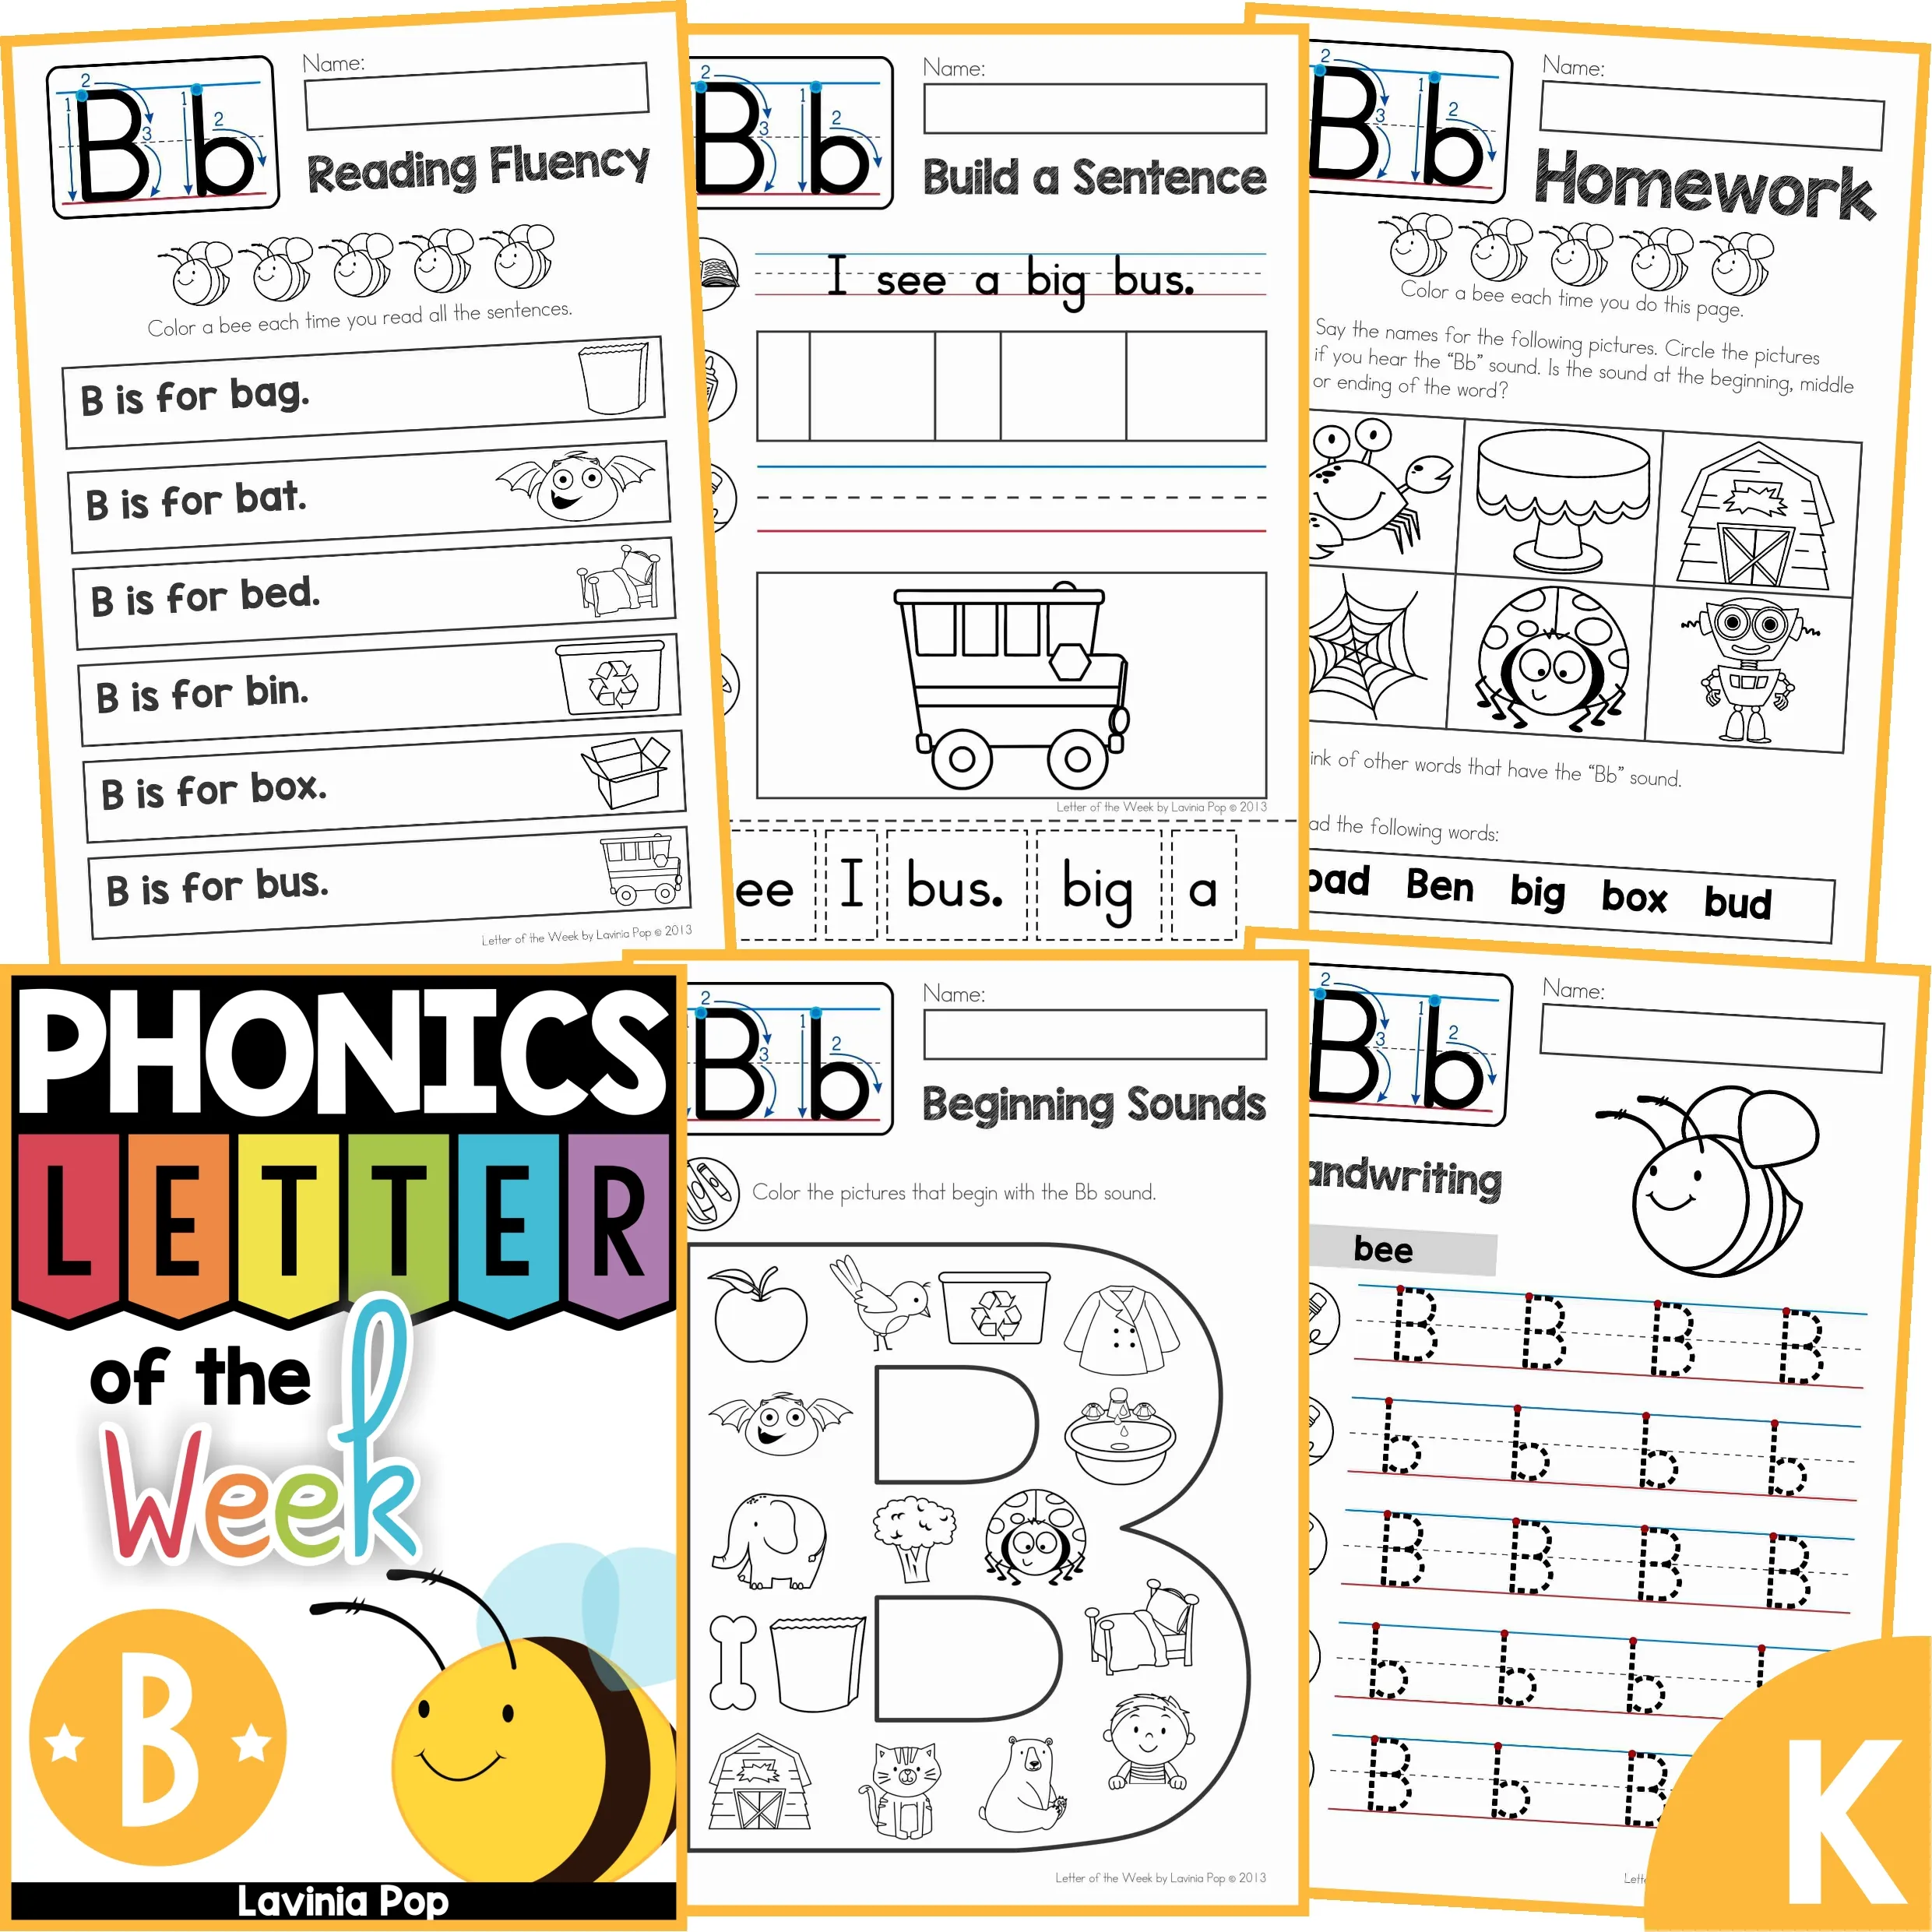 FREE Phonics Letter of the Week B Worksheets & Activities